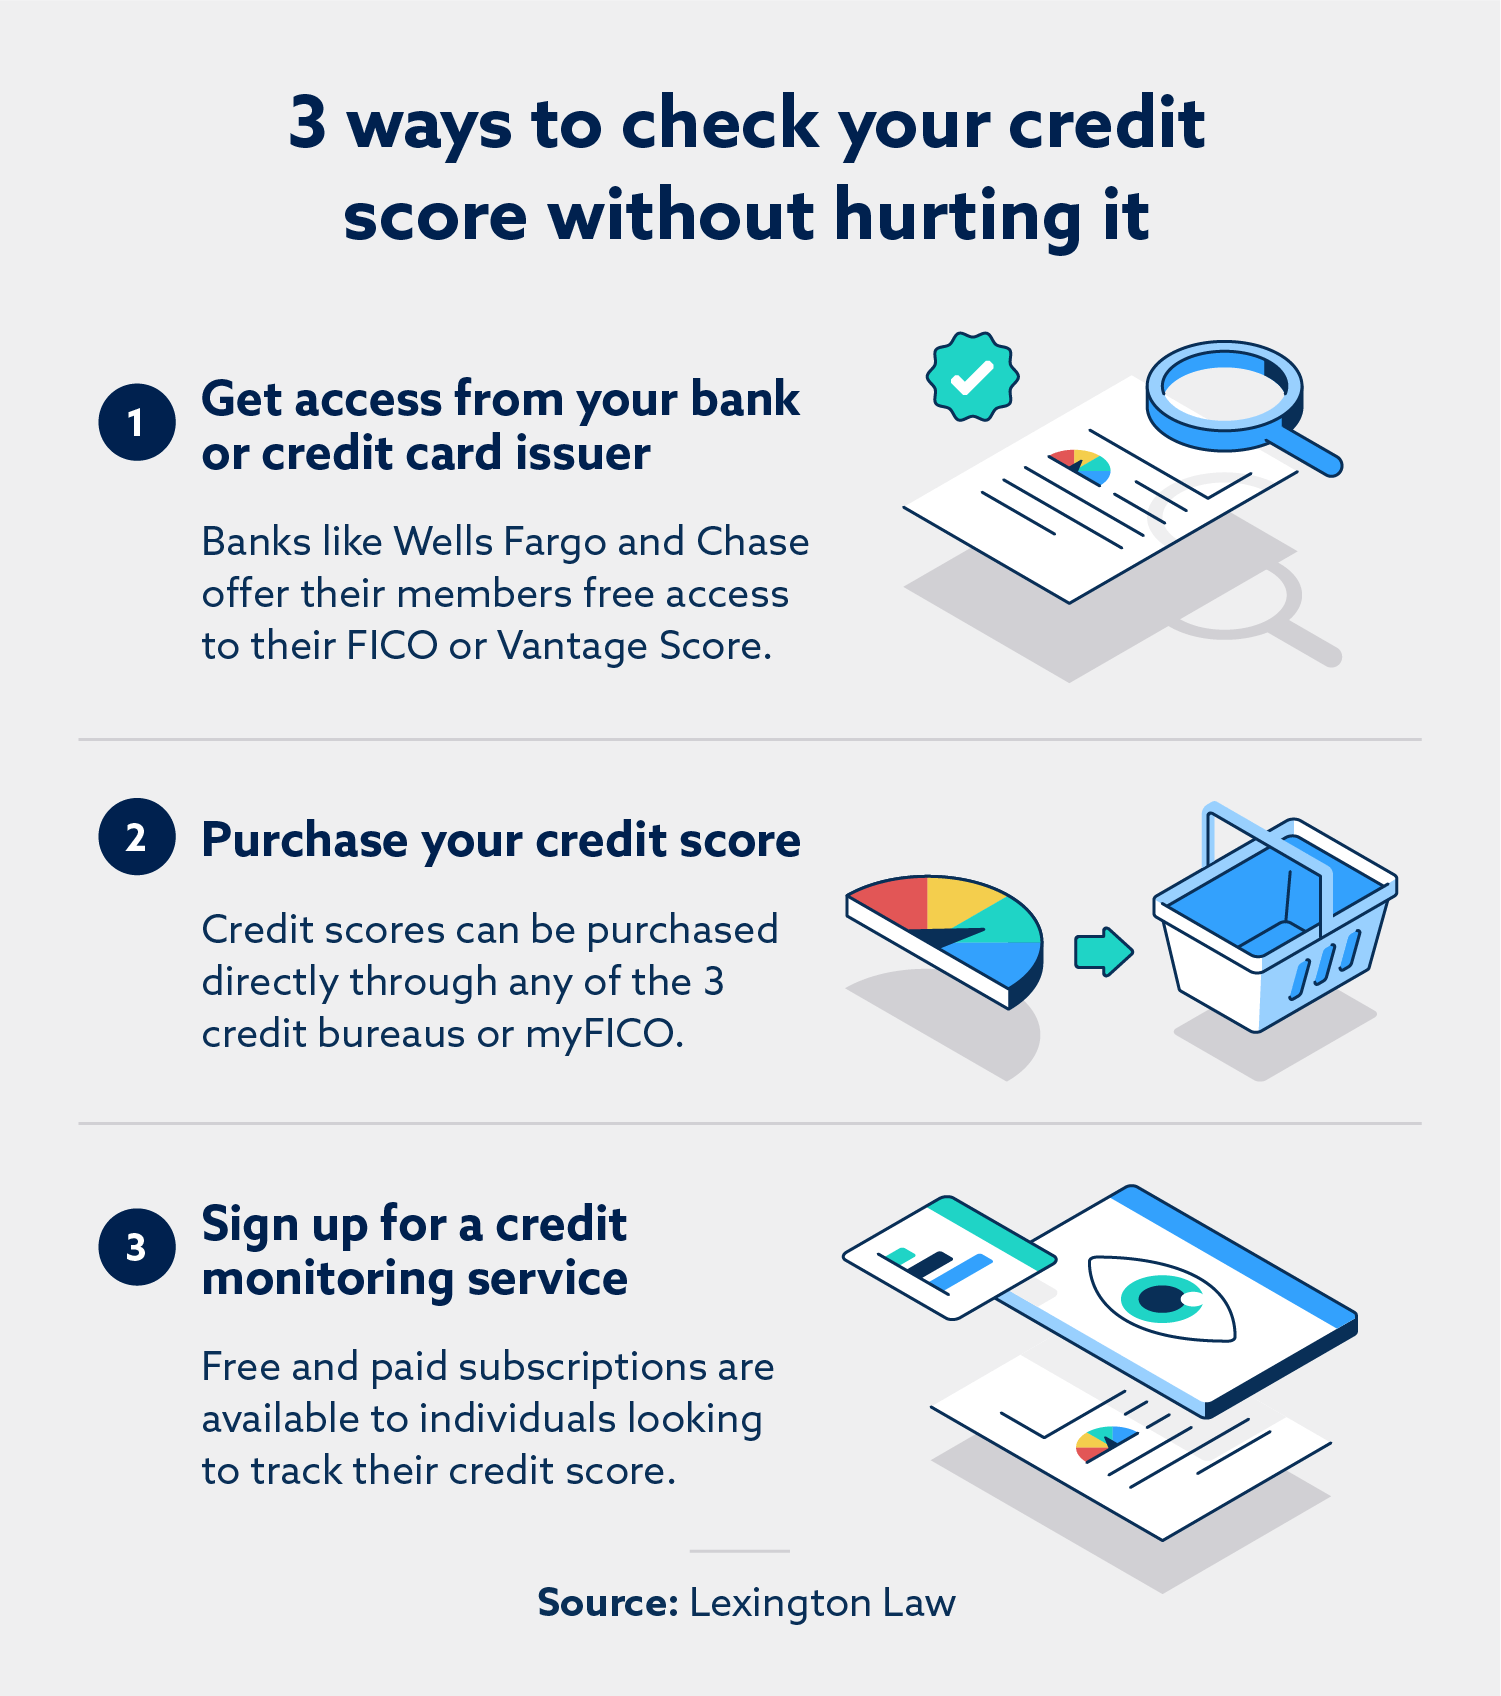 How To Check Your Credit Score Without Lowering It?